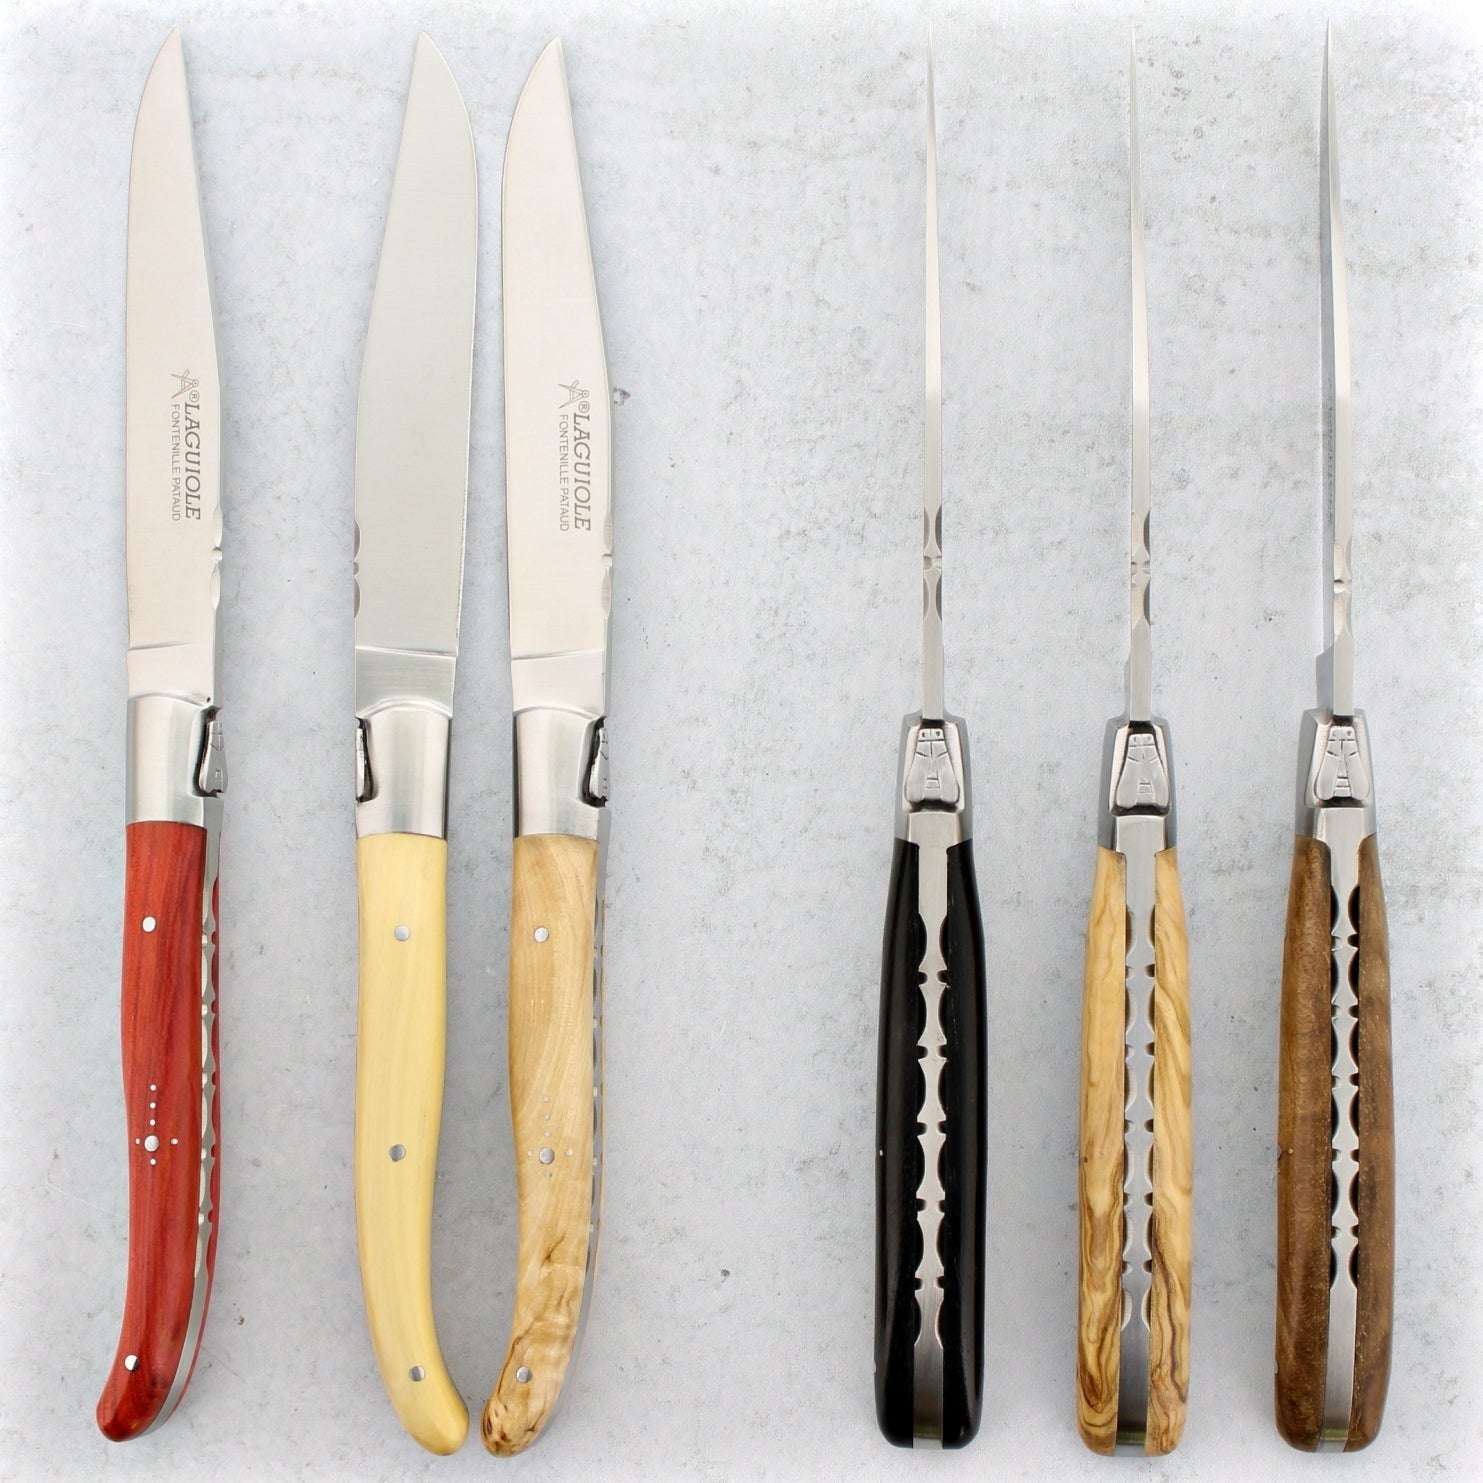 Laguiole Forged Steak Knives Mixed Wood Handle